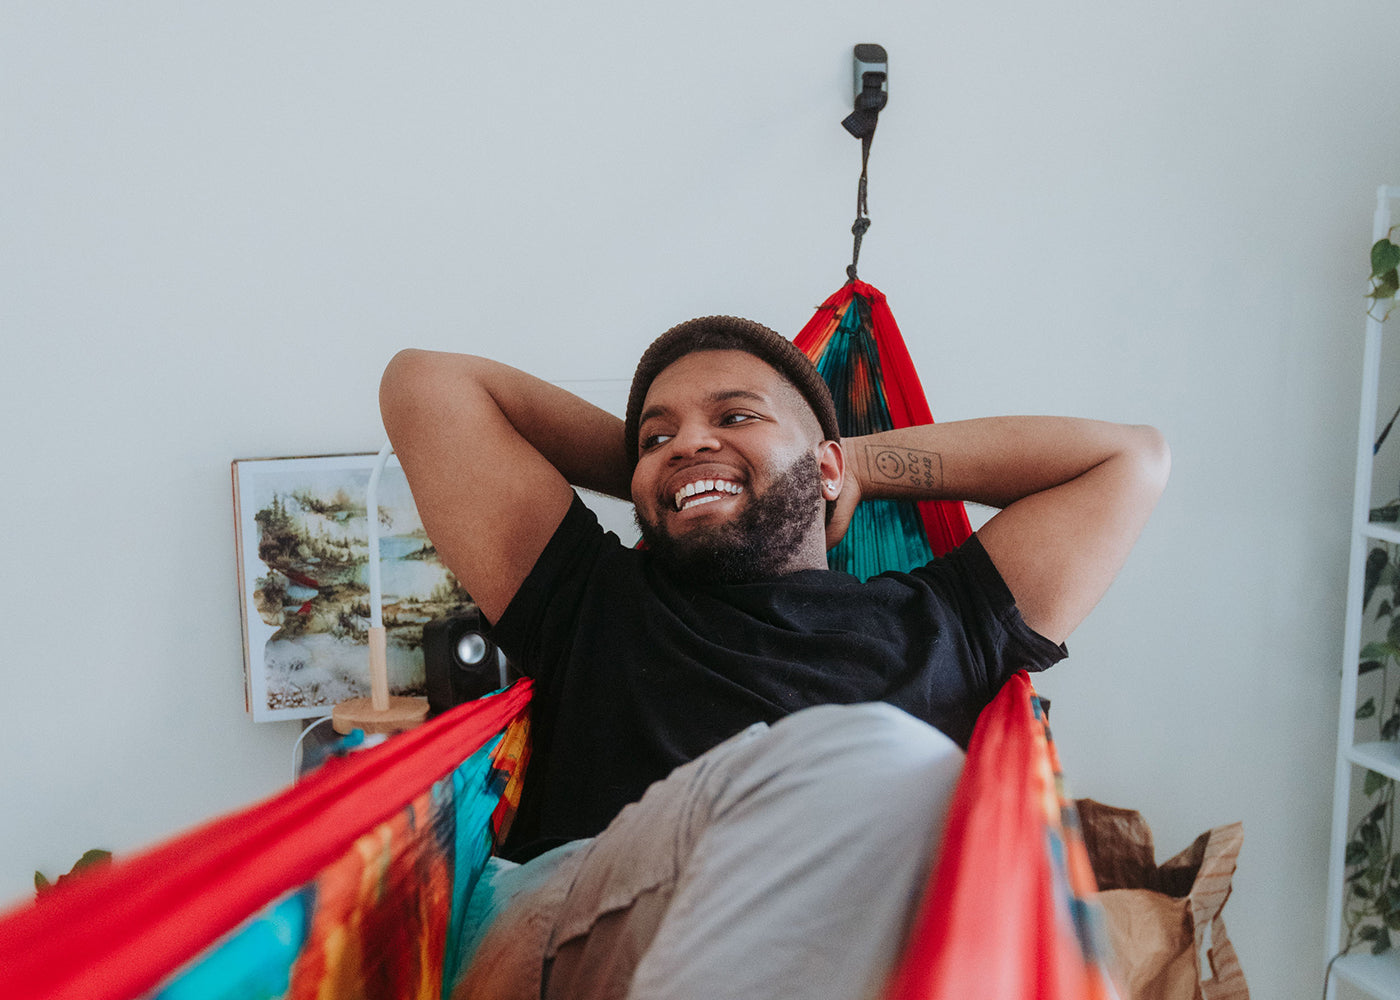 A man uses a deluxe indoor hammock hanging kit while in a room.